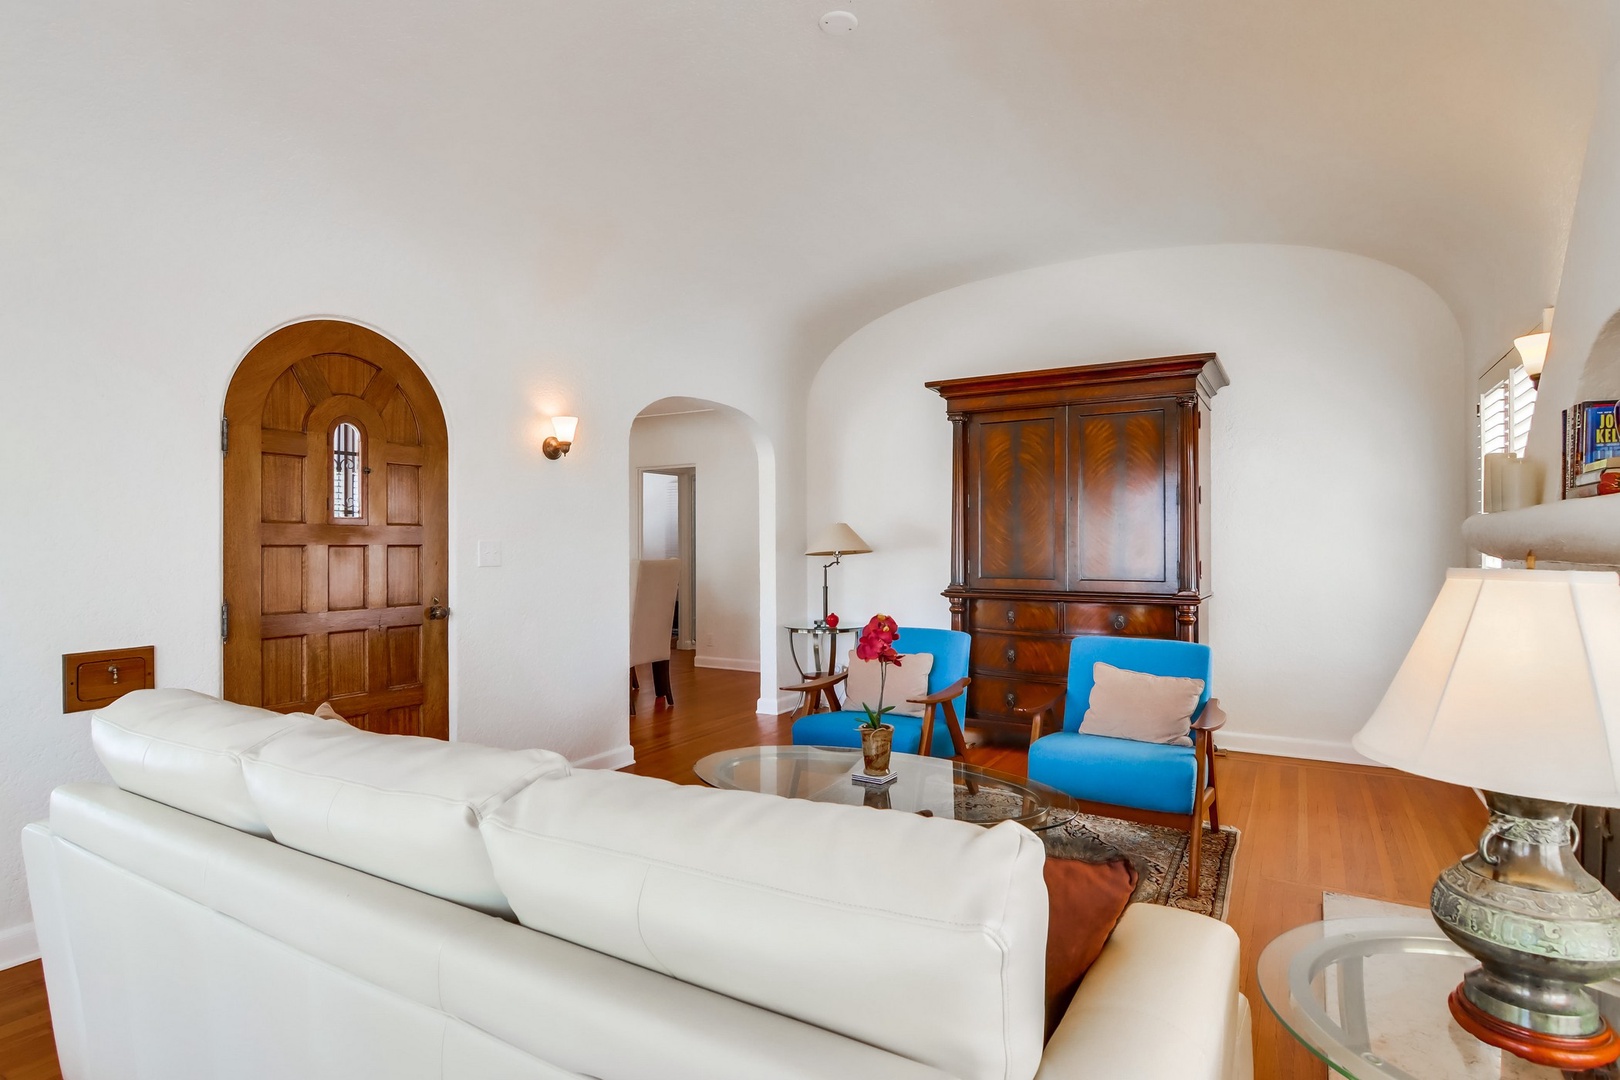 Living room with arched doorways and ceiling